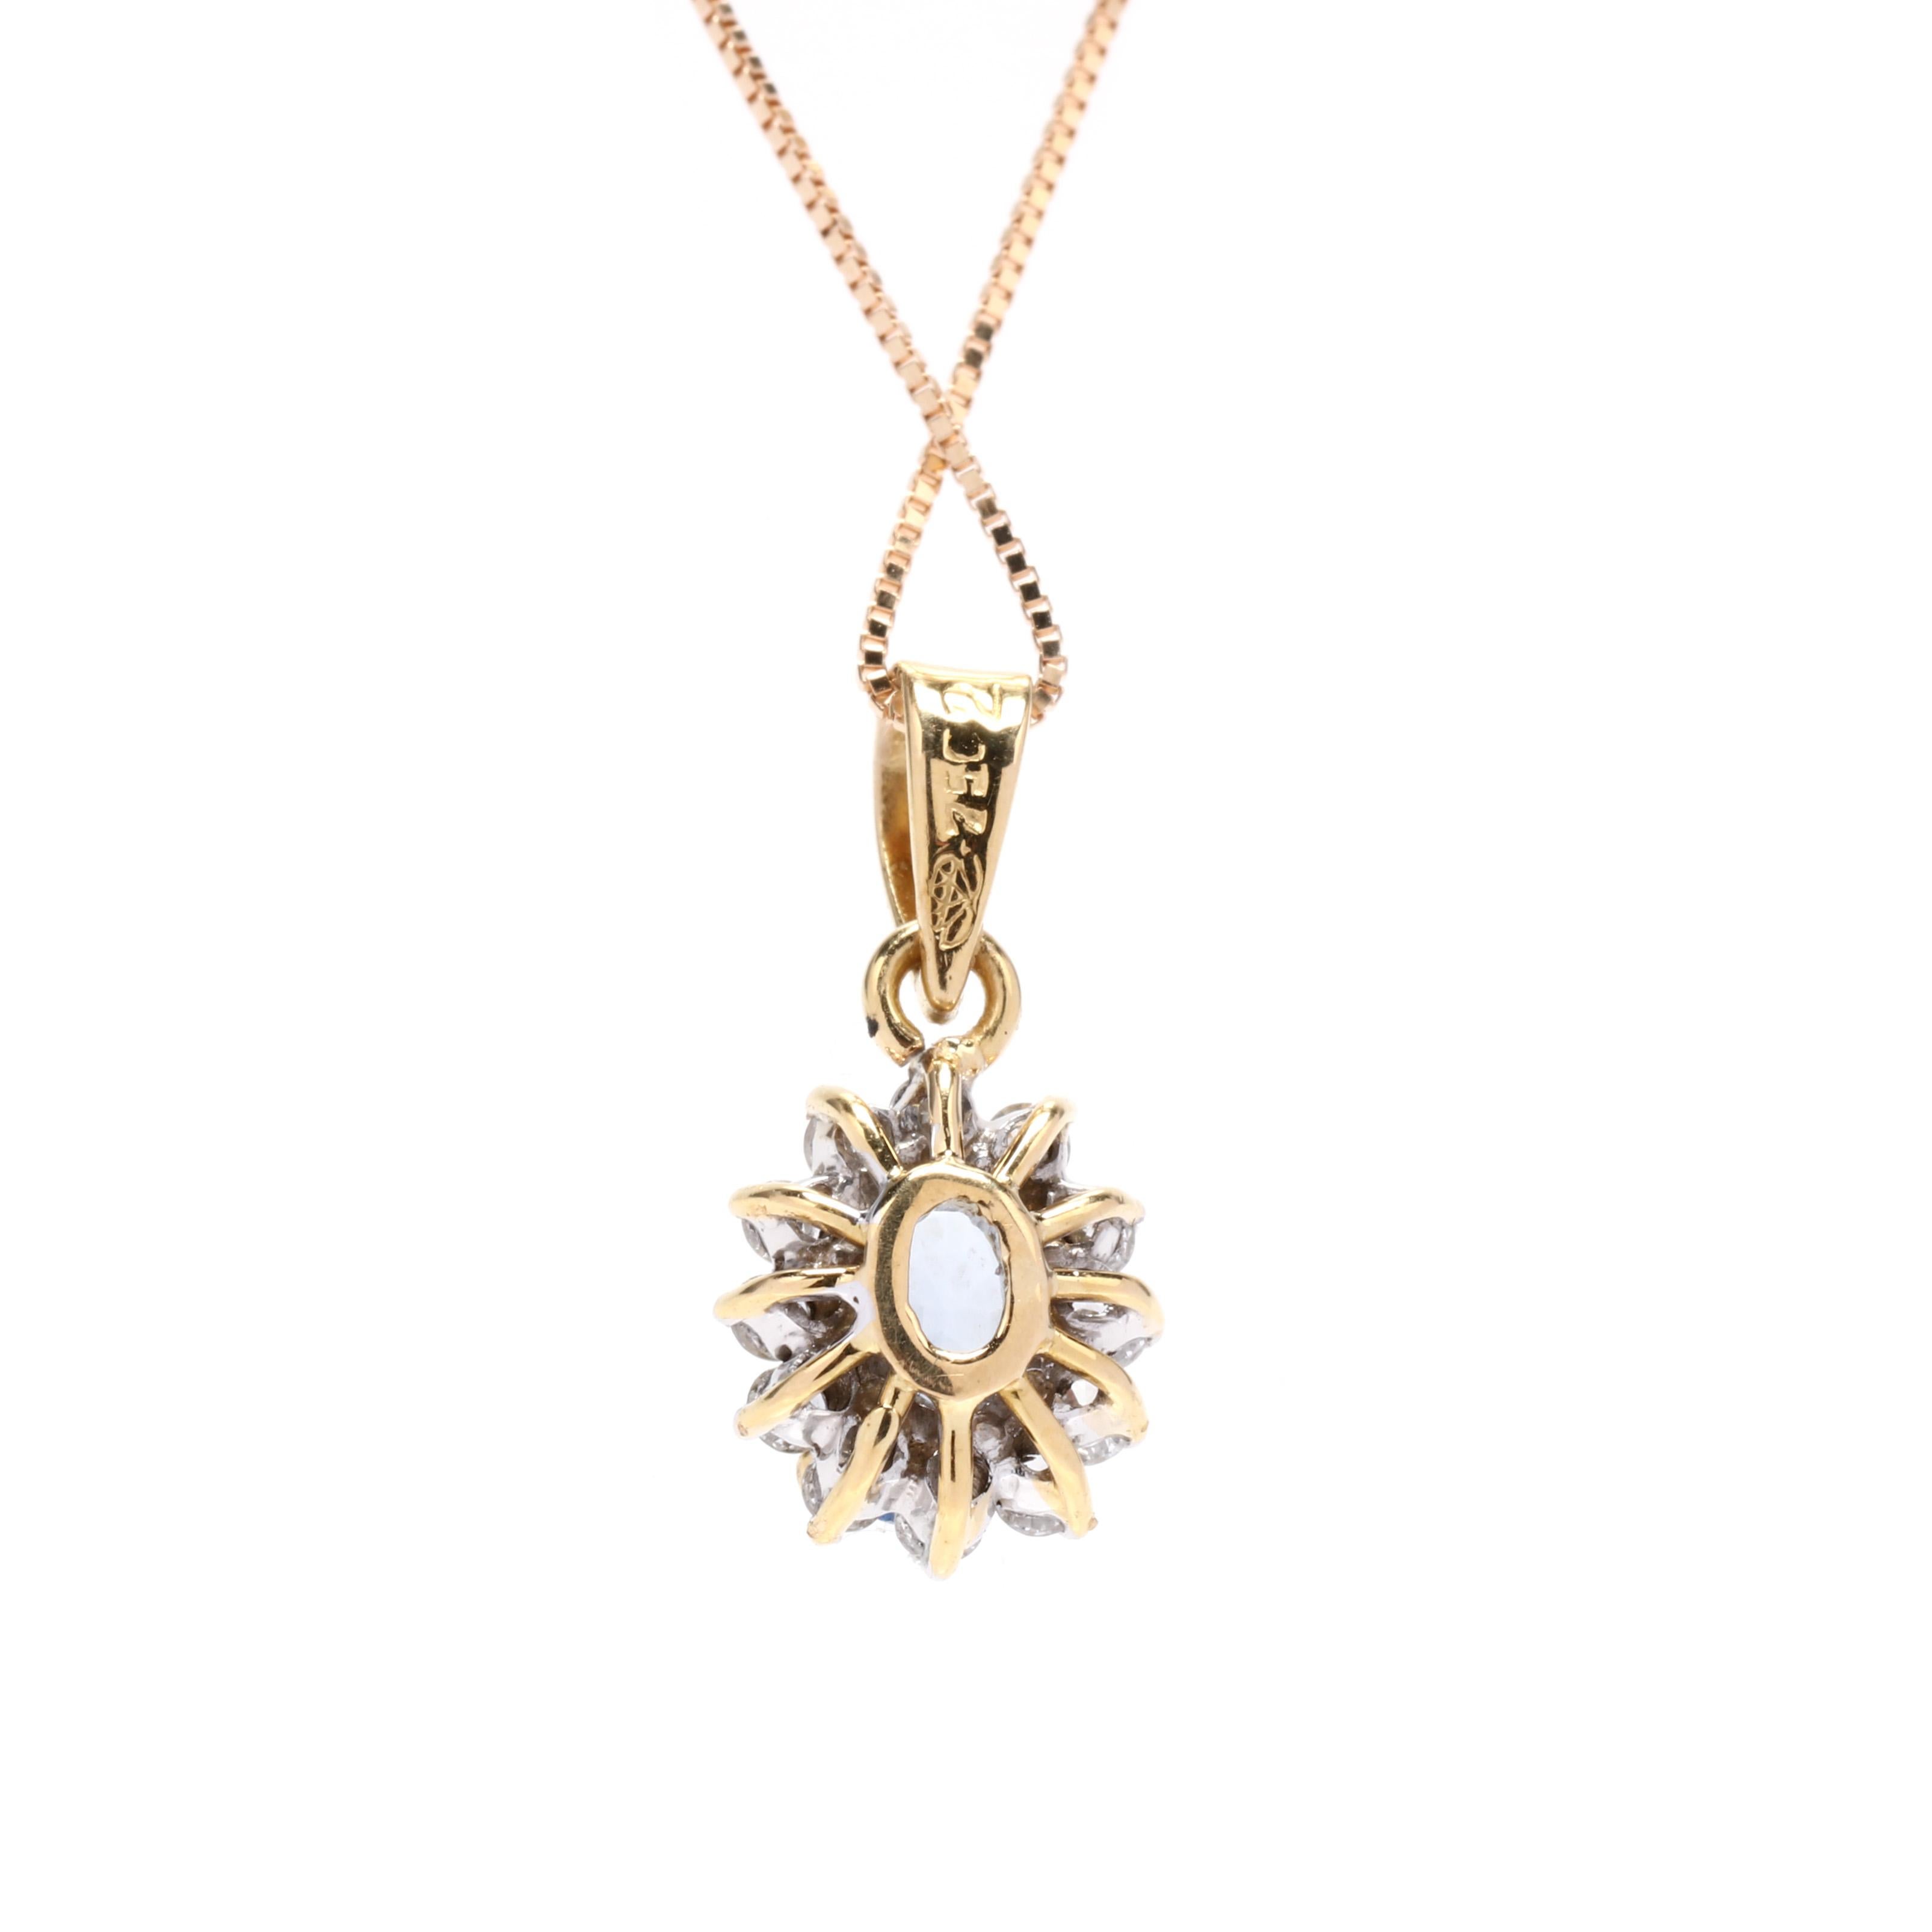 An 14 karat yellow gold sapphire and diamond halo pendant necklace. This pendant features a prong set, oval cut light blue sapphire weighing approximately 1.10 carat surrounded by a diamond halo weighing approximately .24 total carats suspended from